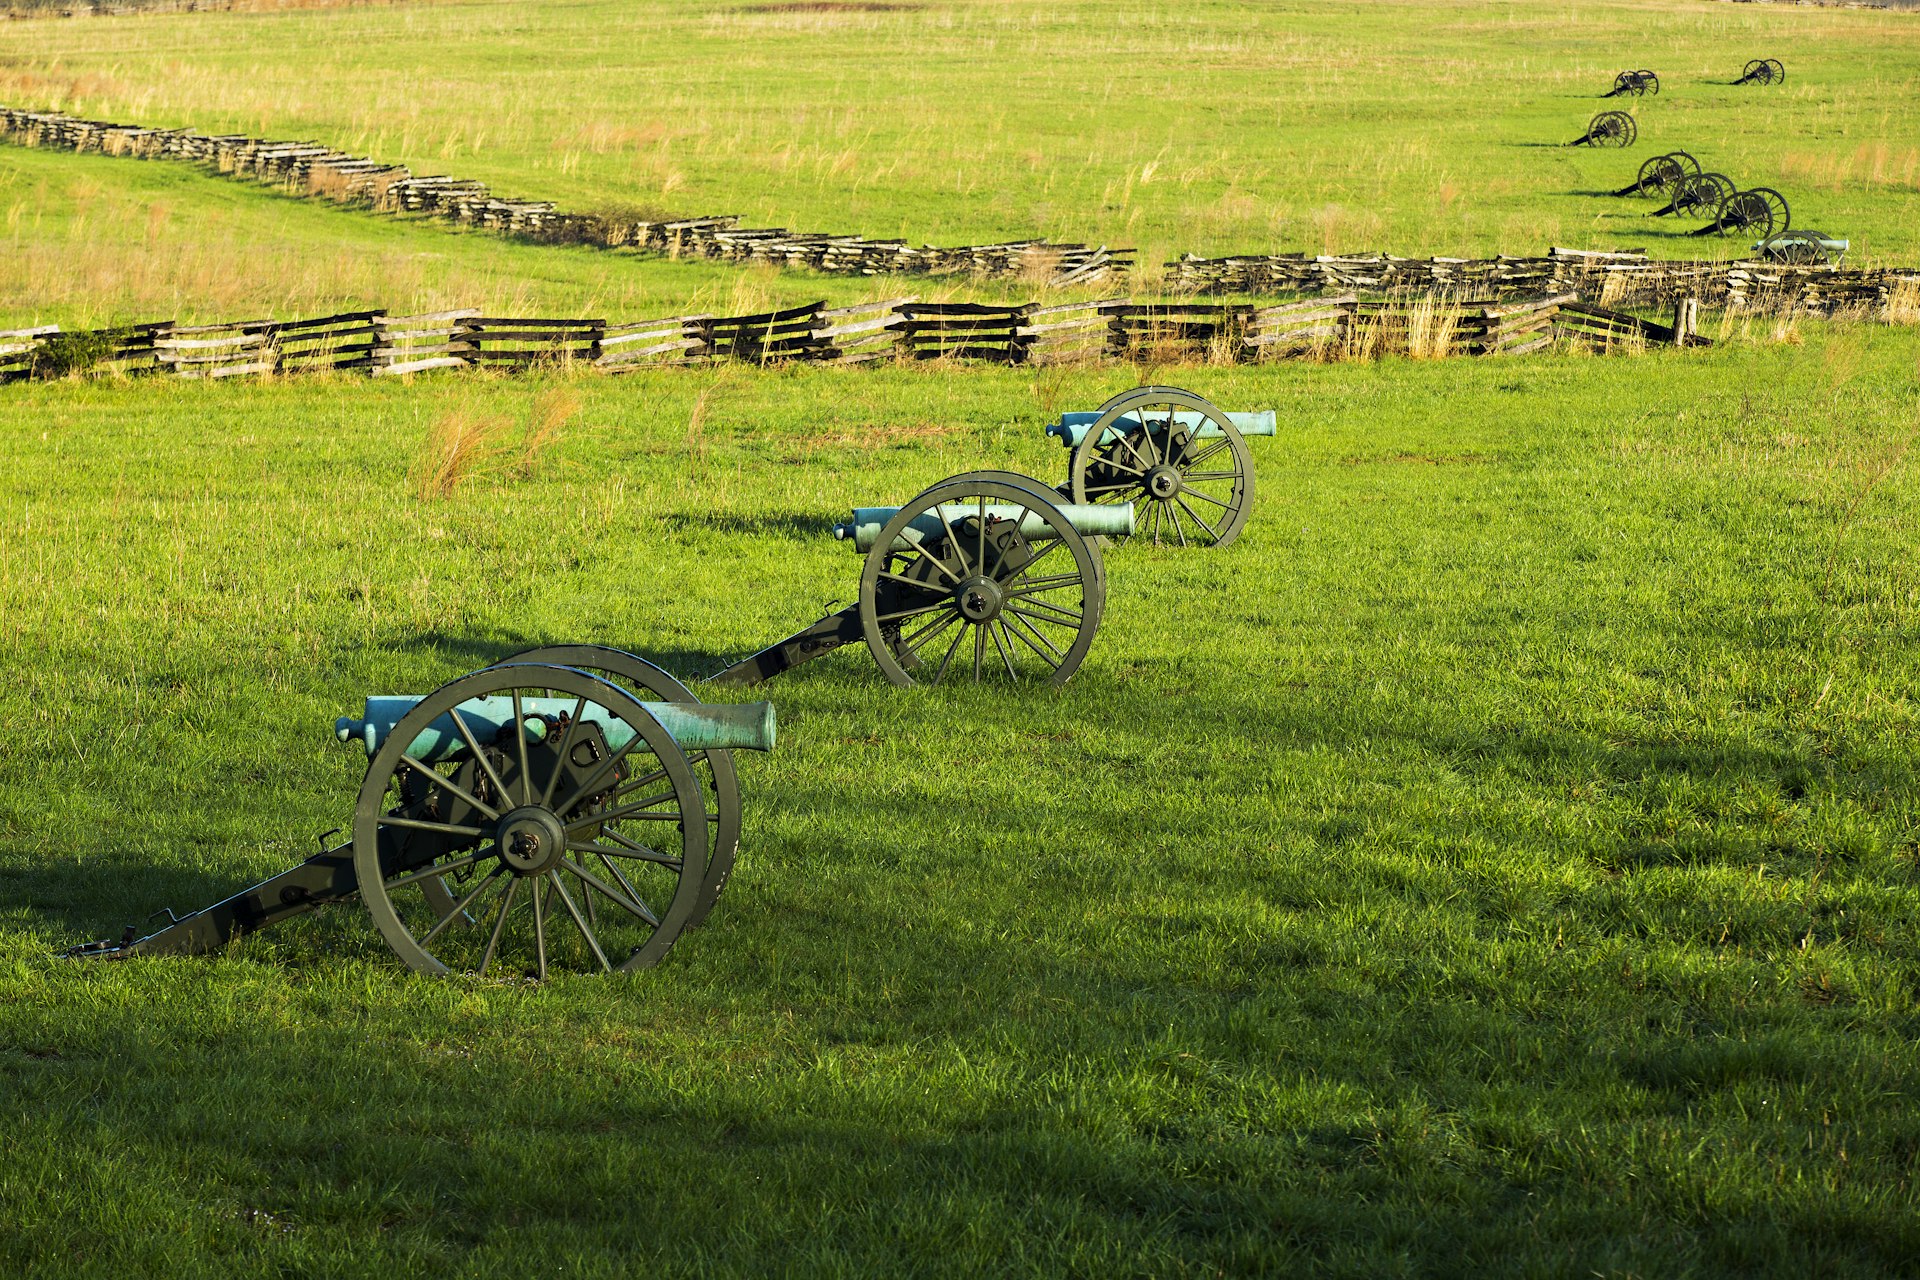 Reconstructed cannons in a field at Pea Ridge National Military Park in Arkansas, USA, the site of a Civil War battle